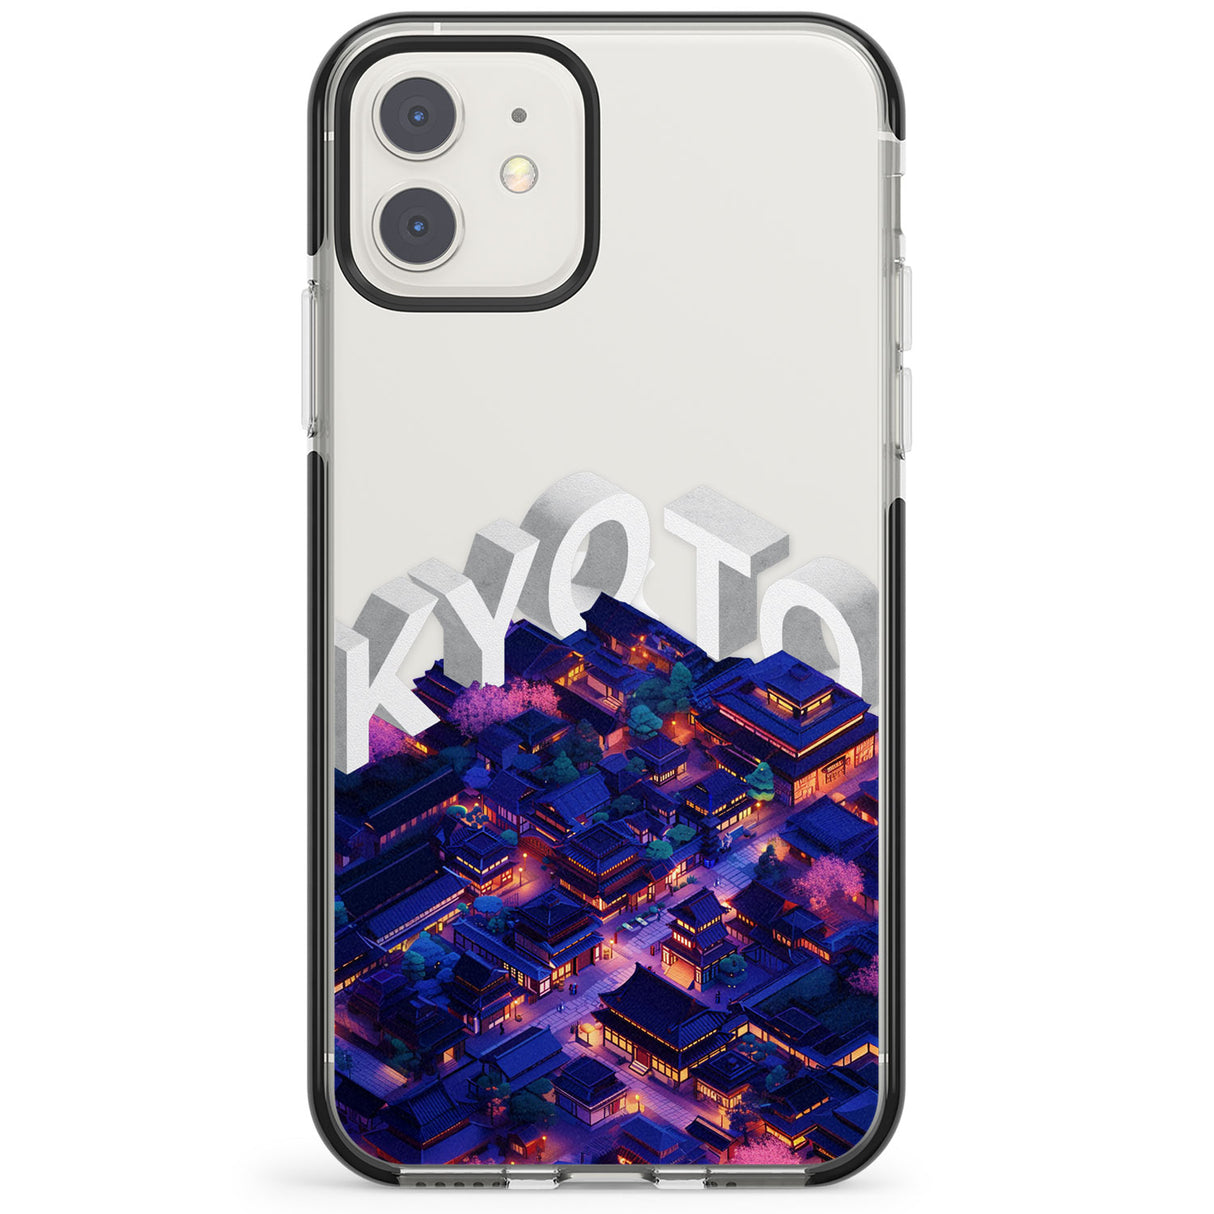 Kyoto Impact Phone Case for iPhone 11, iphone 12